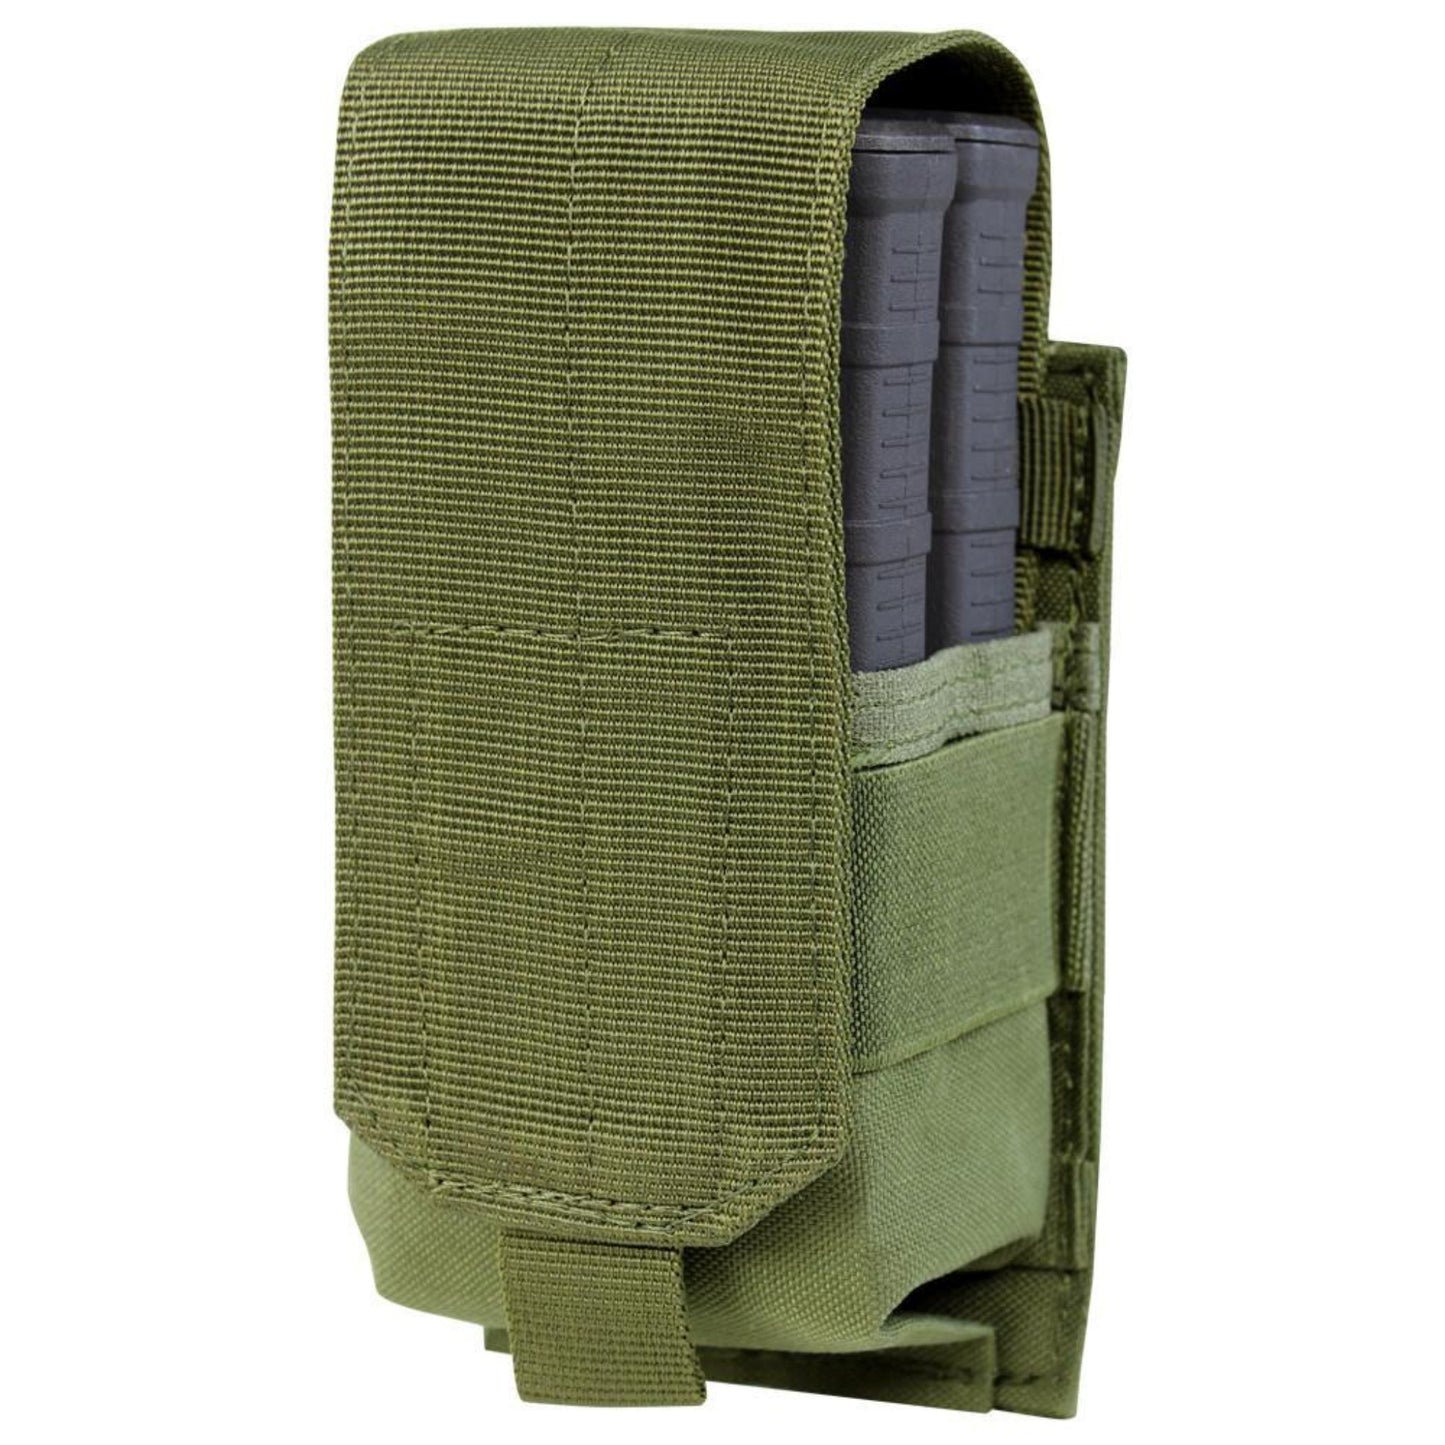 Image of the Single M14 Mag Pouch-Gen II in olive drab.